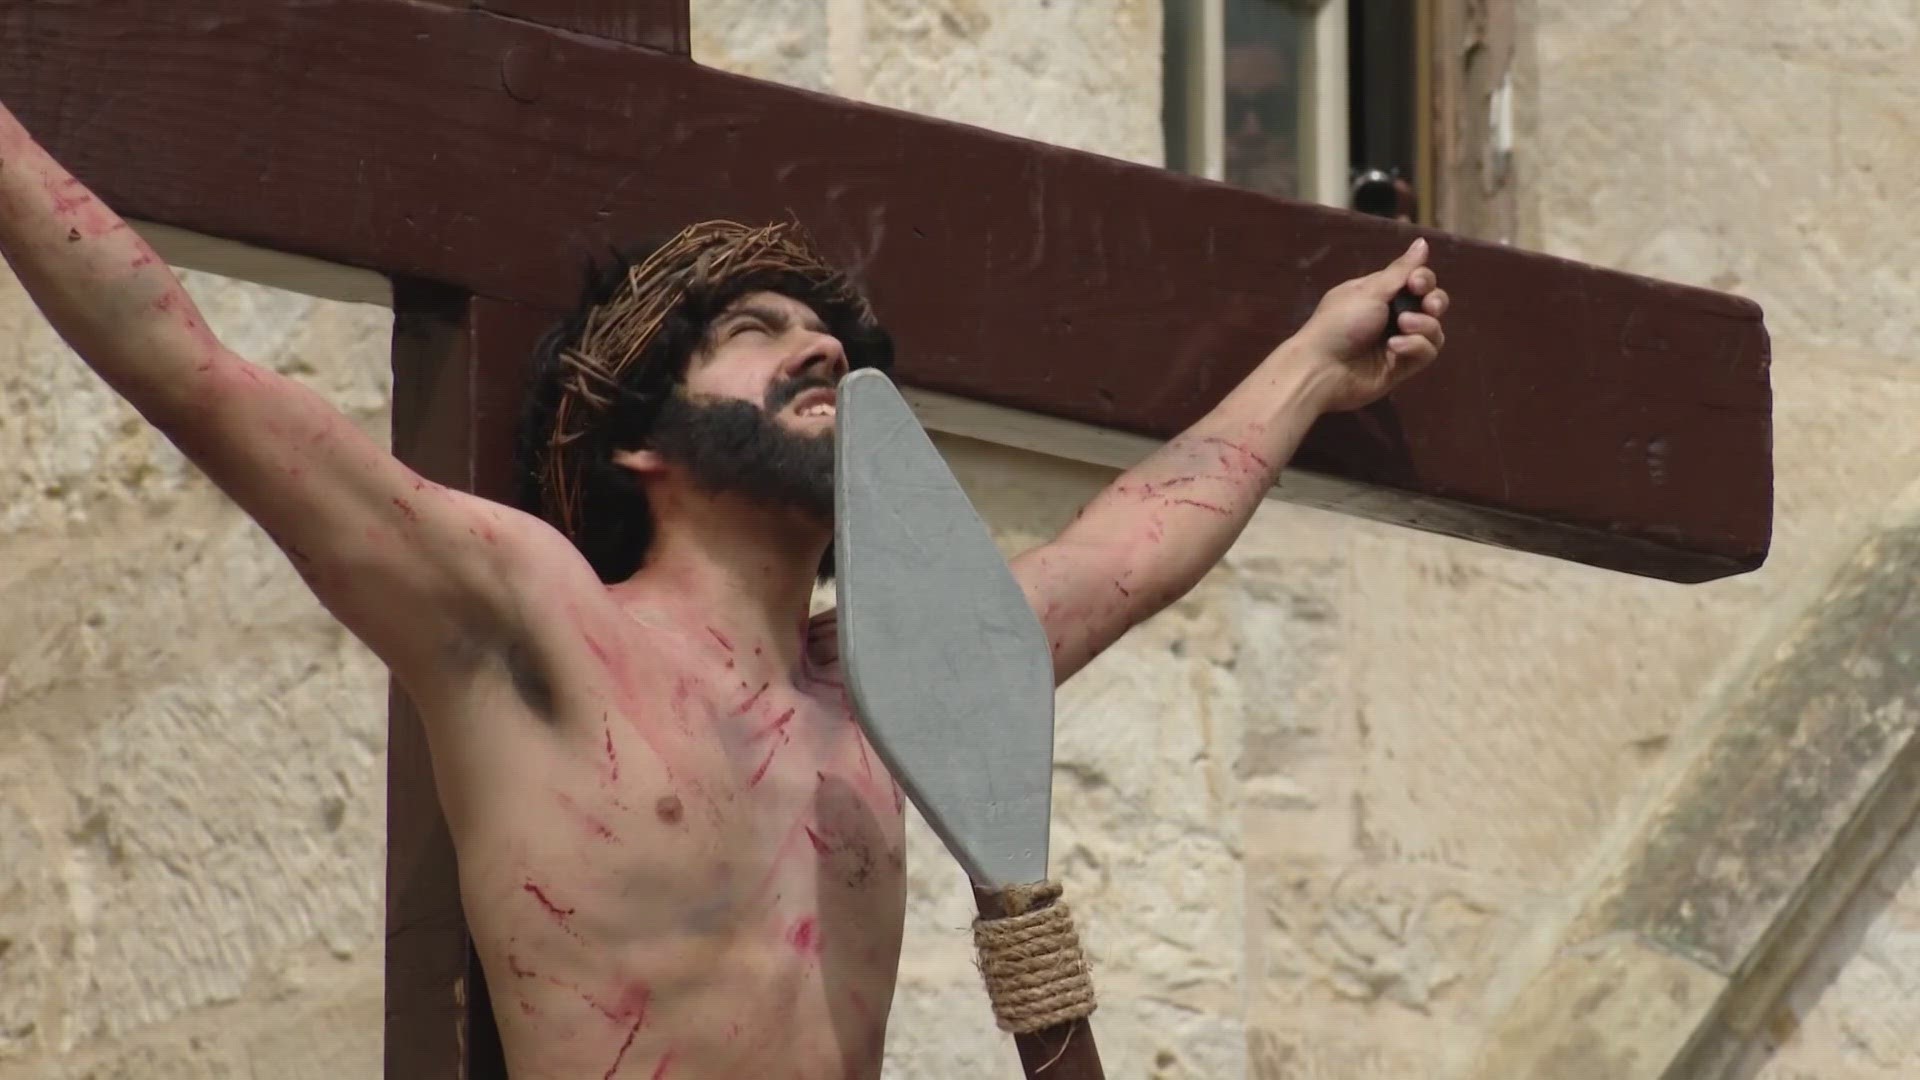 Meet the all-volunteer cast of The Passion of Christ re-enactment in downtown San Antonio